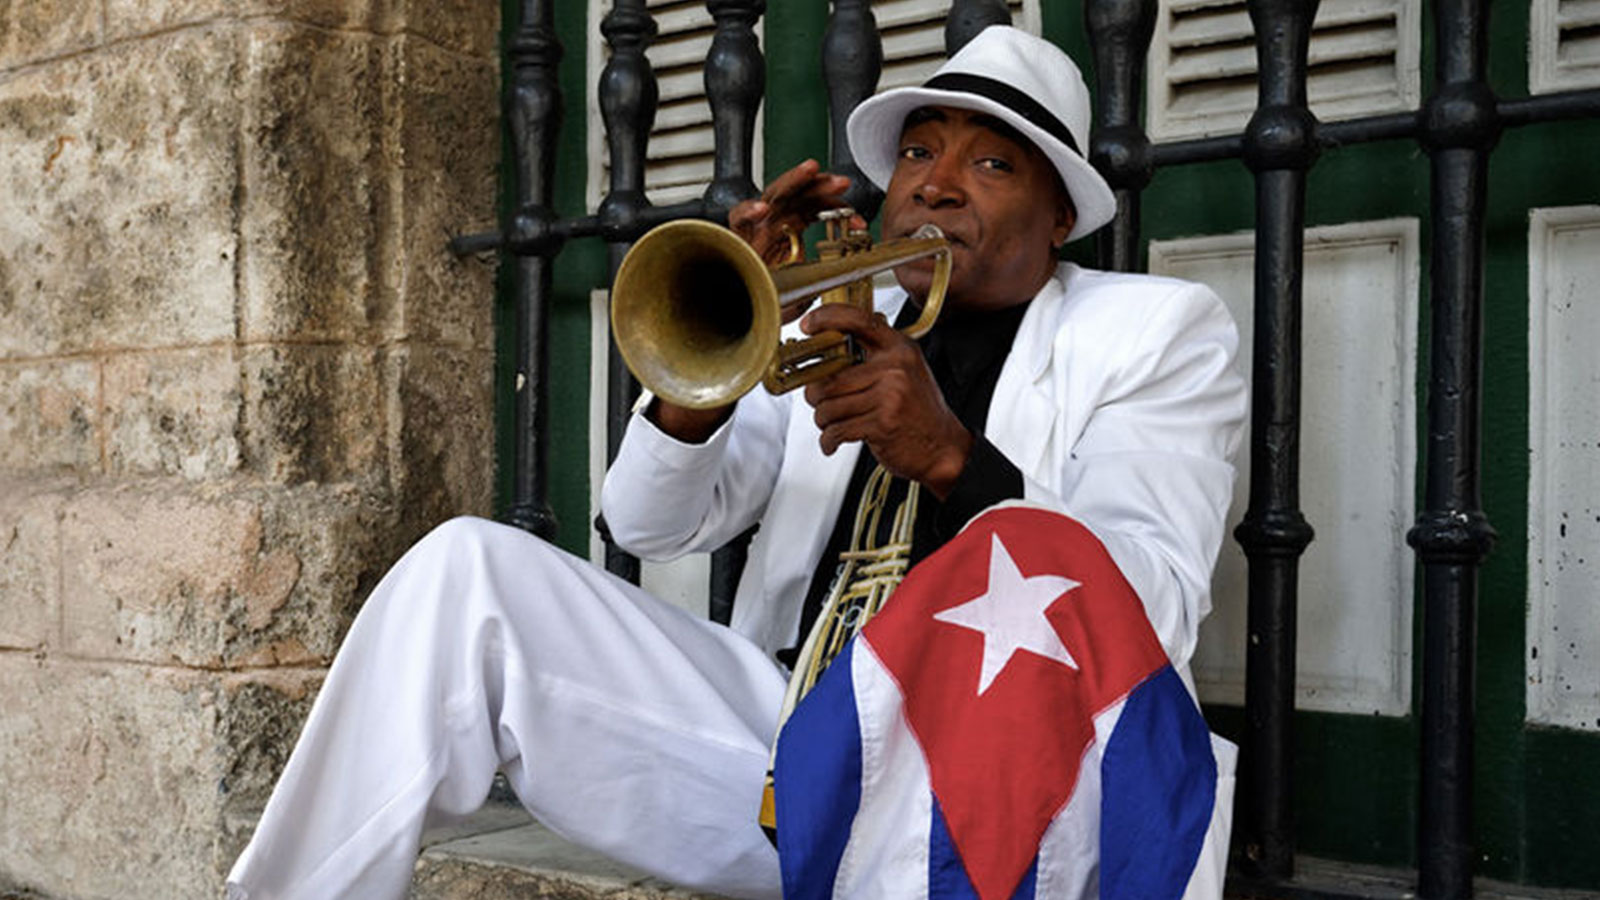 Cuba’s census, skin color and social analysis